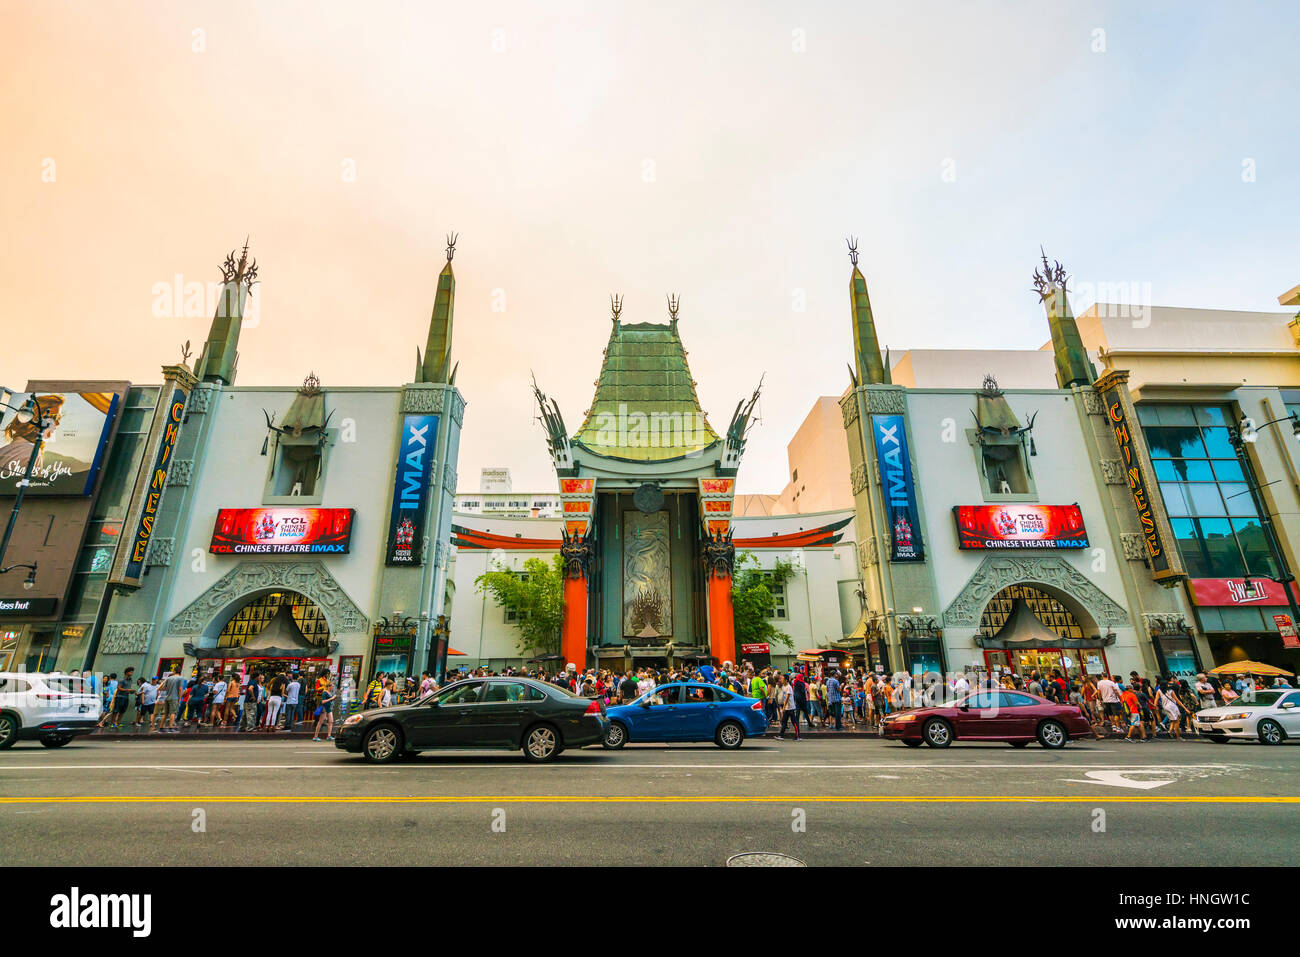 Los Angeles,California,usa. 2016/07/23. :Chinese theatre at sunset,Hollywood boulevard,blvd, road at sunset,Los Angeles,California,usa. Stock Photo